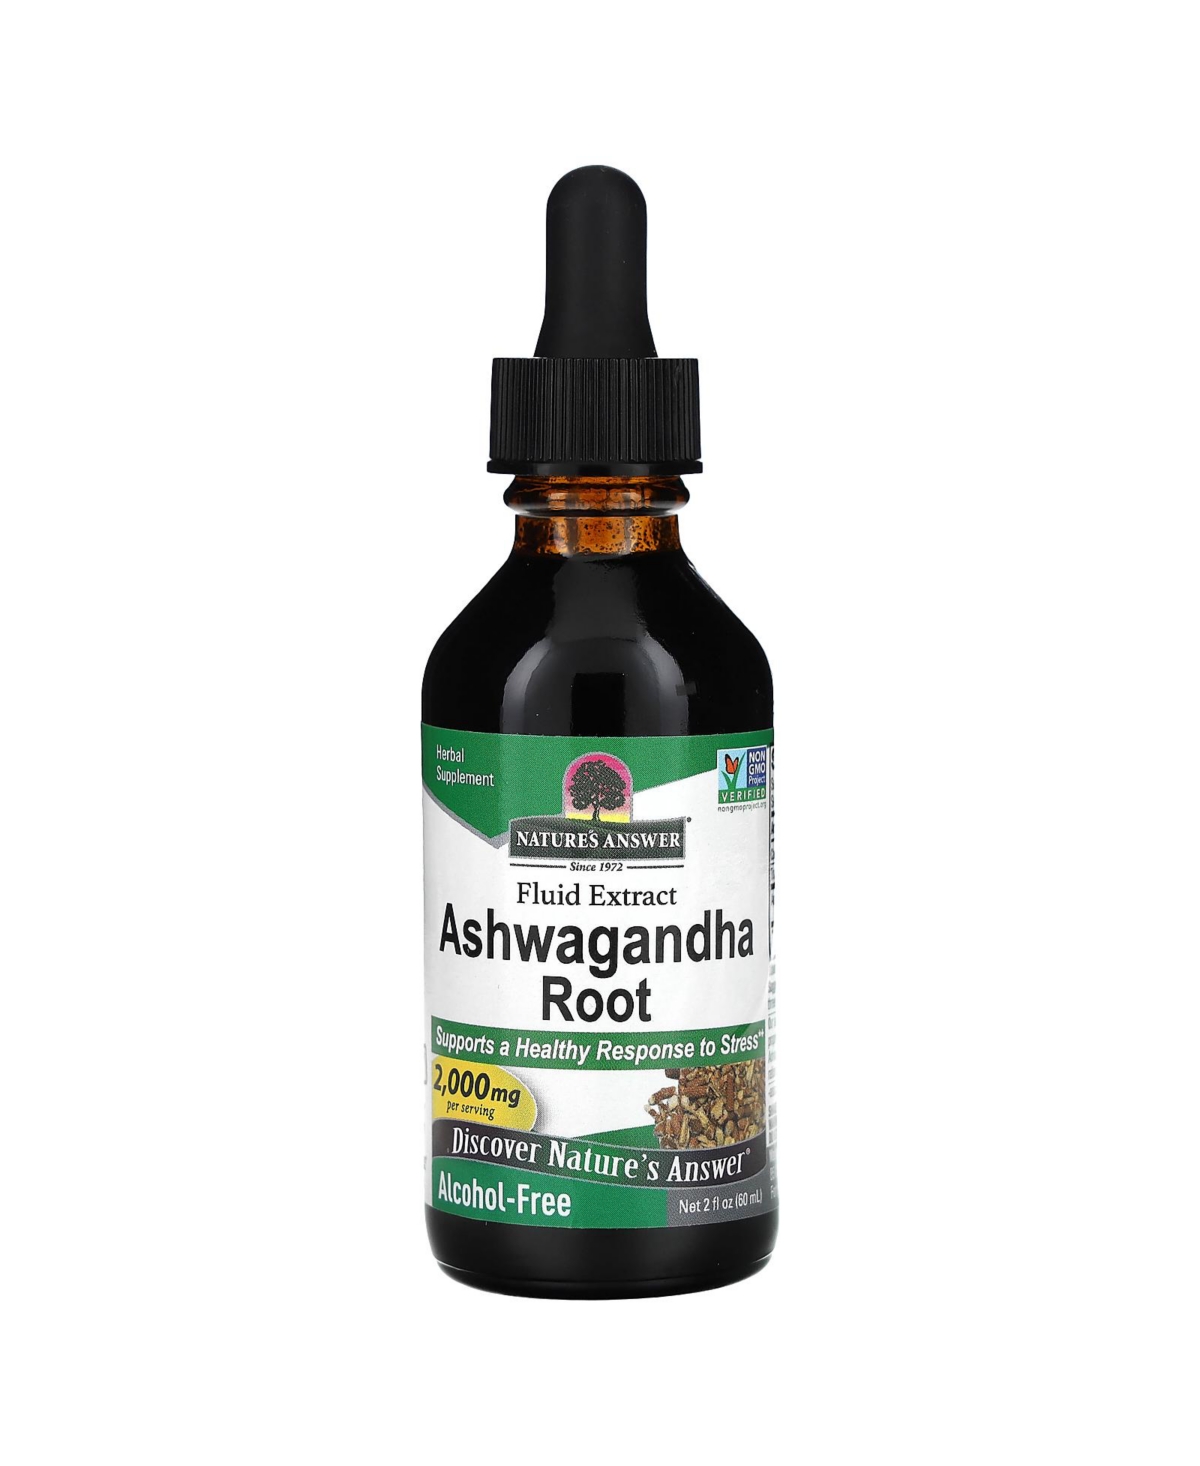 Ashwagandha Root Fluid Extract Alcohol-Free 2 000 mg - 2 fl oz (60 ml) - Assorted Pre-Pack